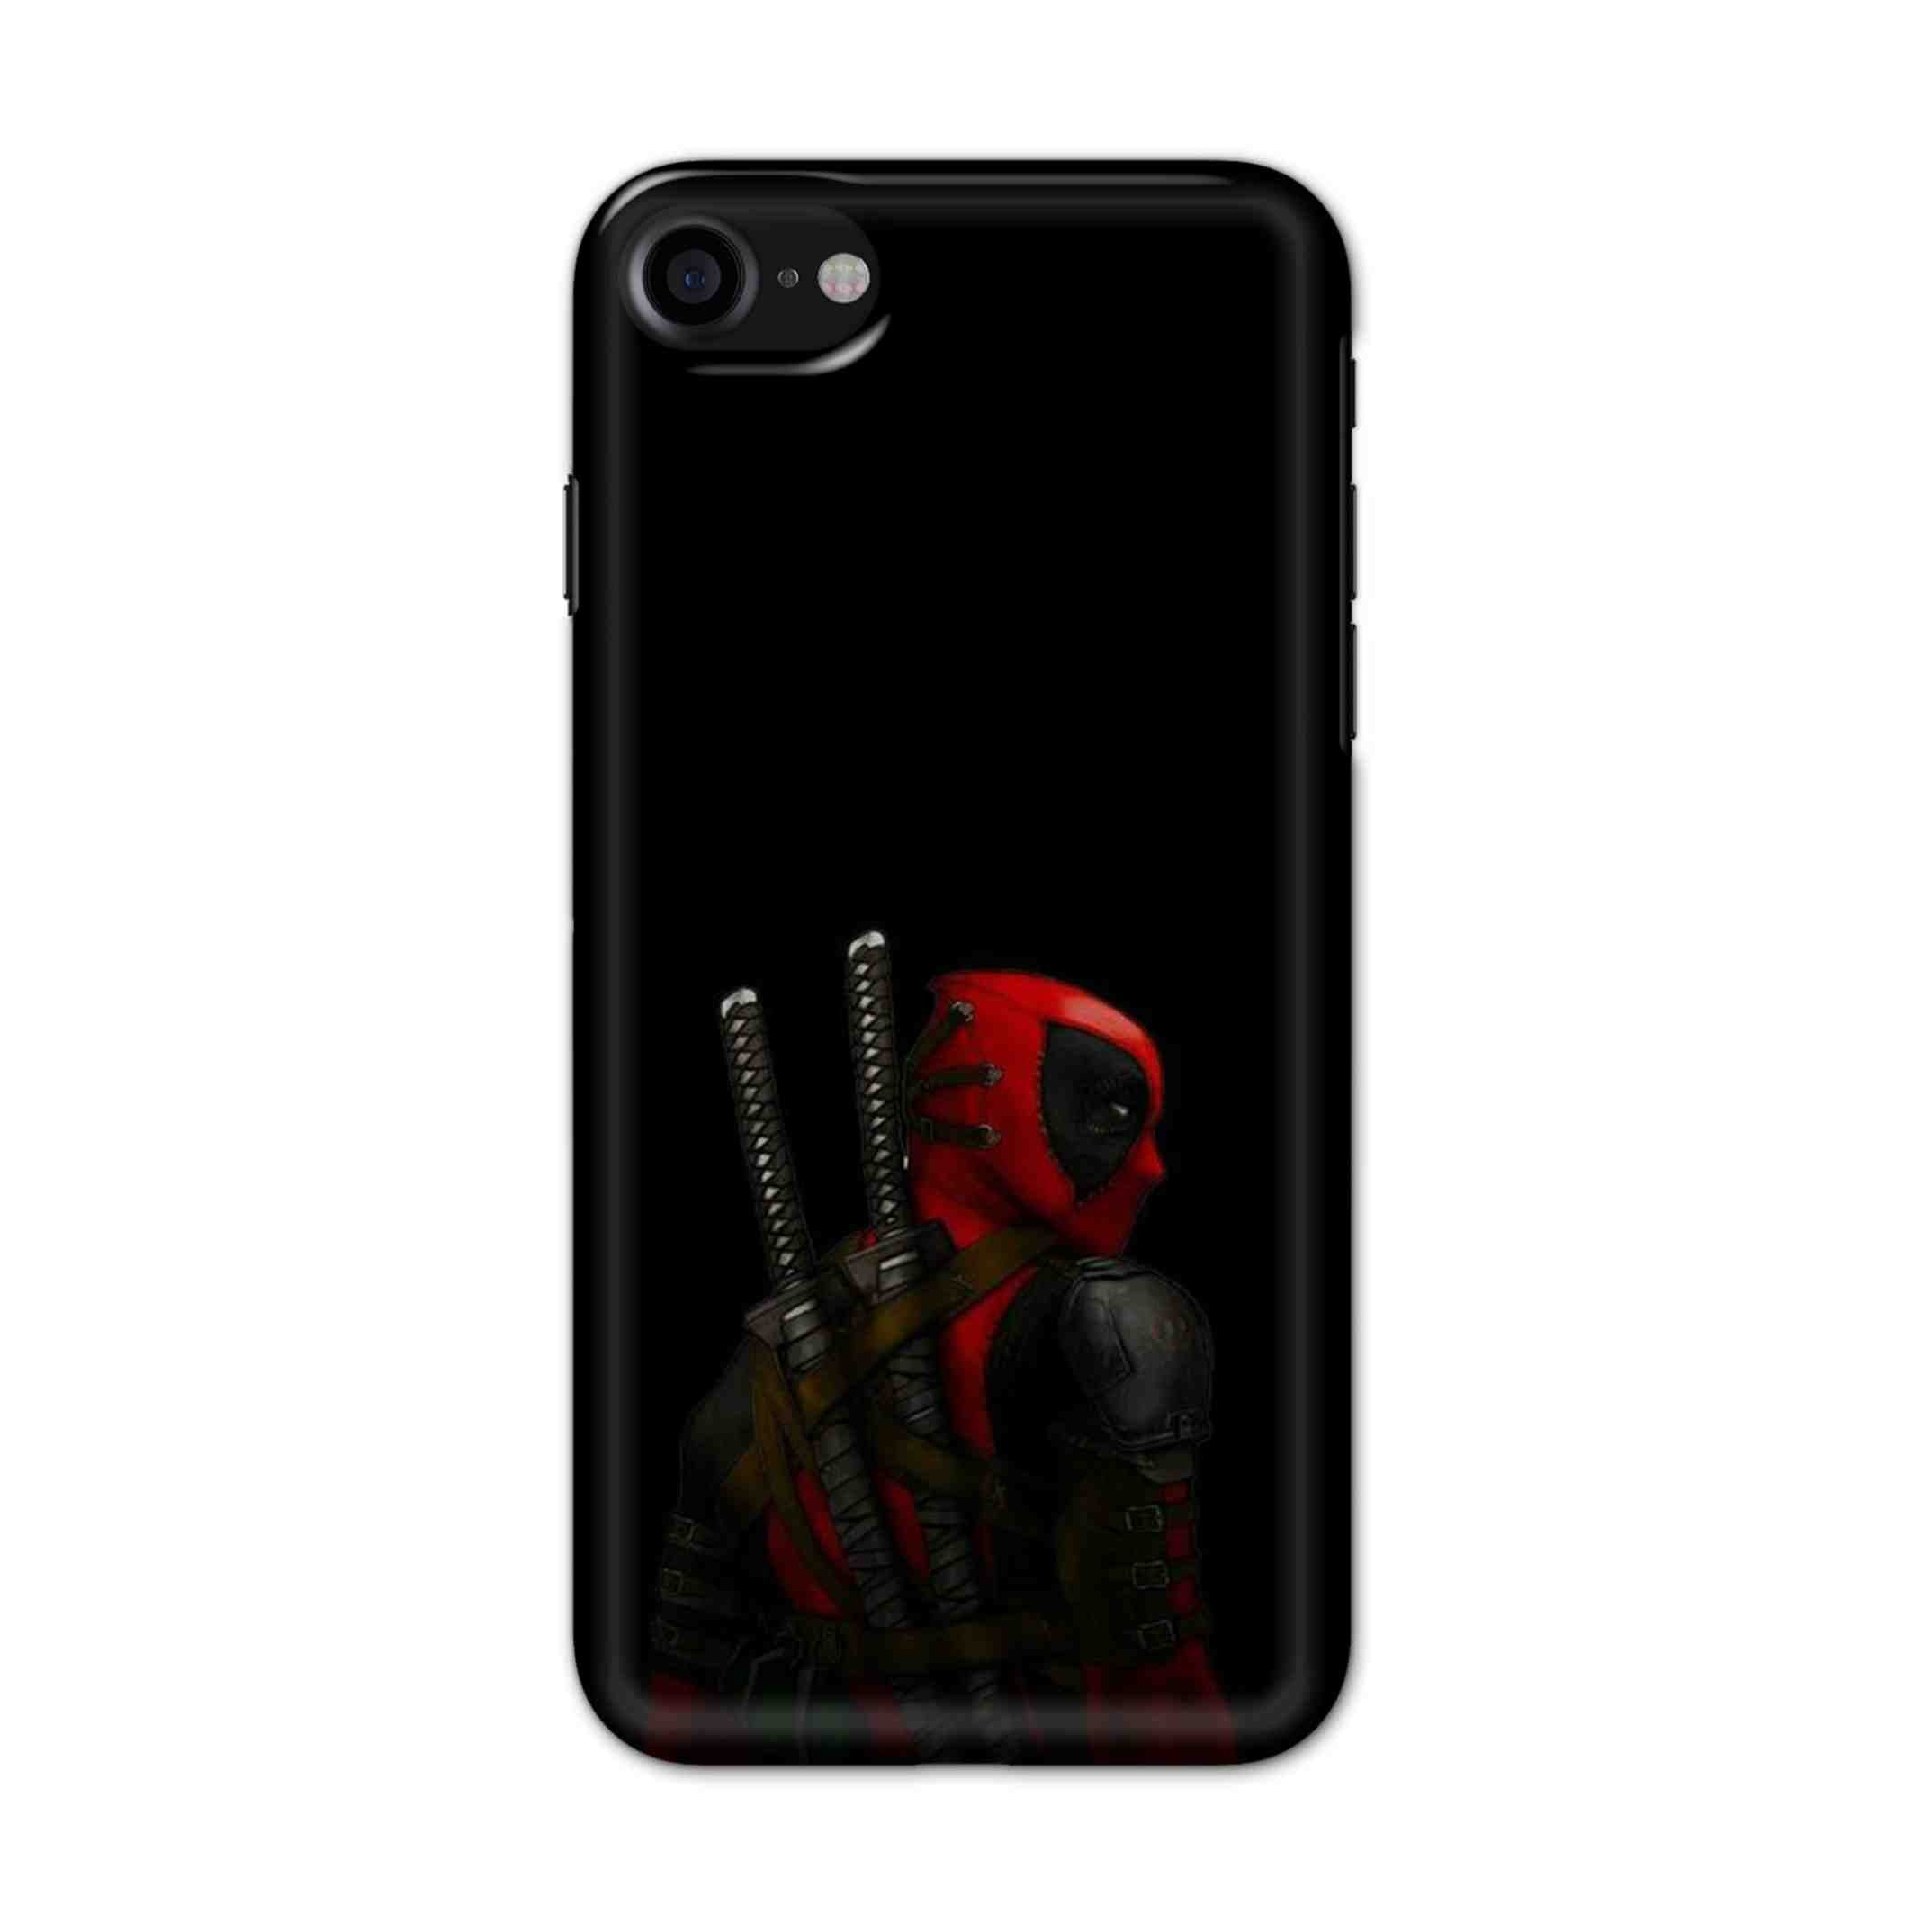 Buy Deadpool Hard Back Mobile Phone Case/Cover For iPhone 7 / 8 Online